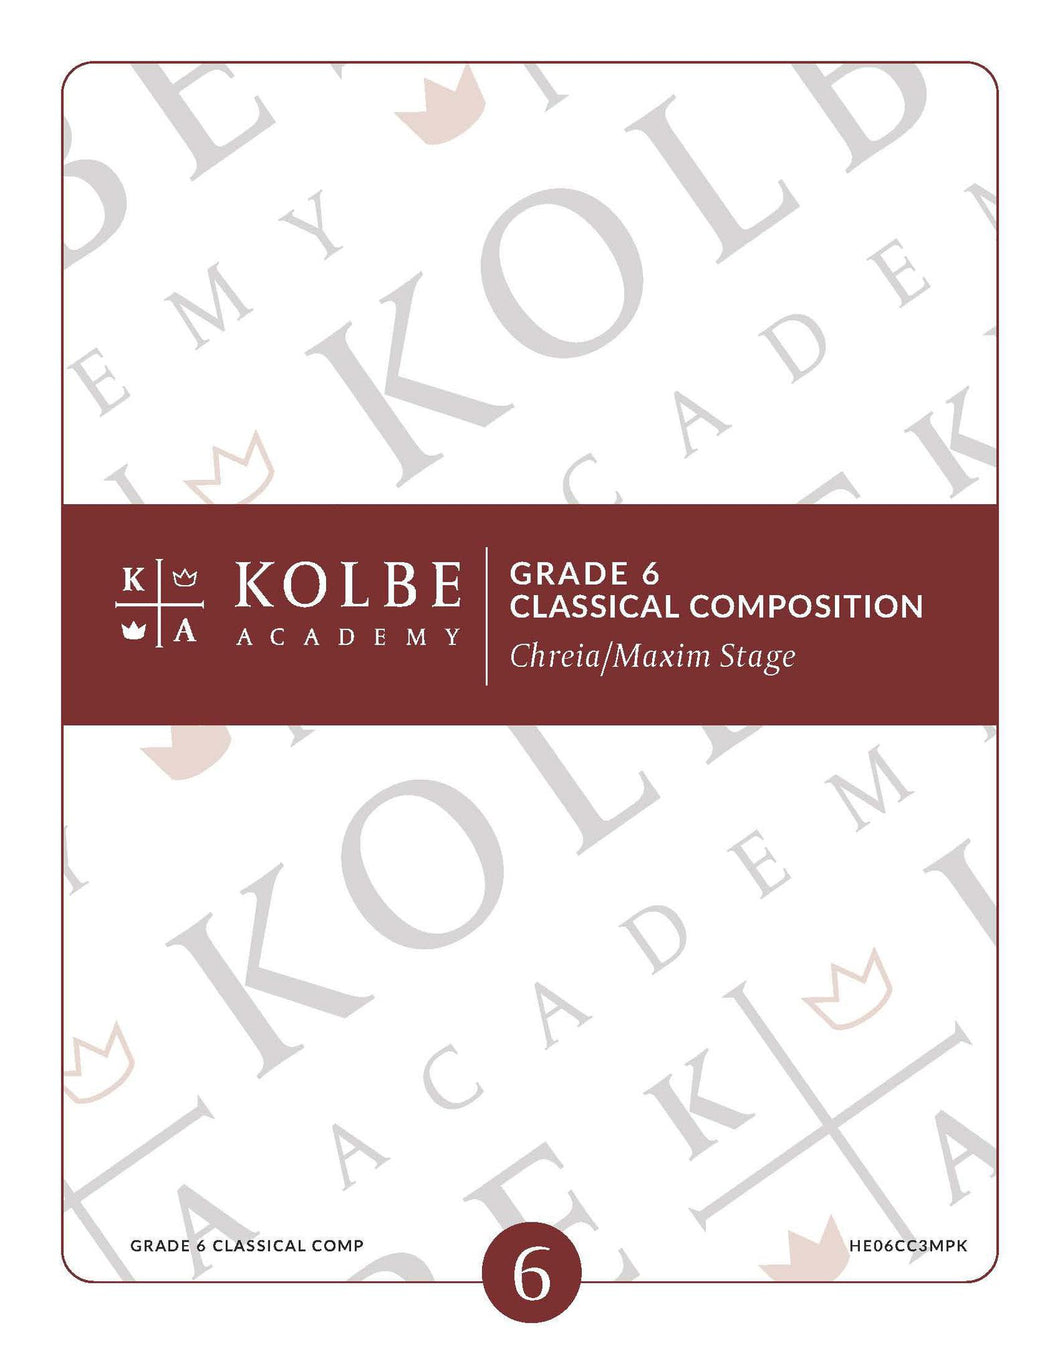 Course Plan & Tests - Classical Composition 3: Chreia/Maxim Stage